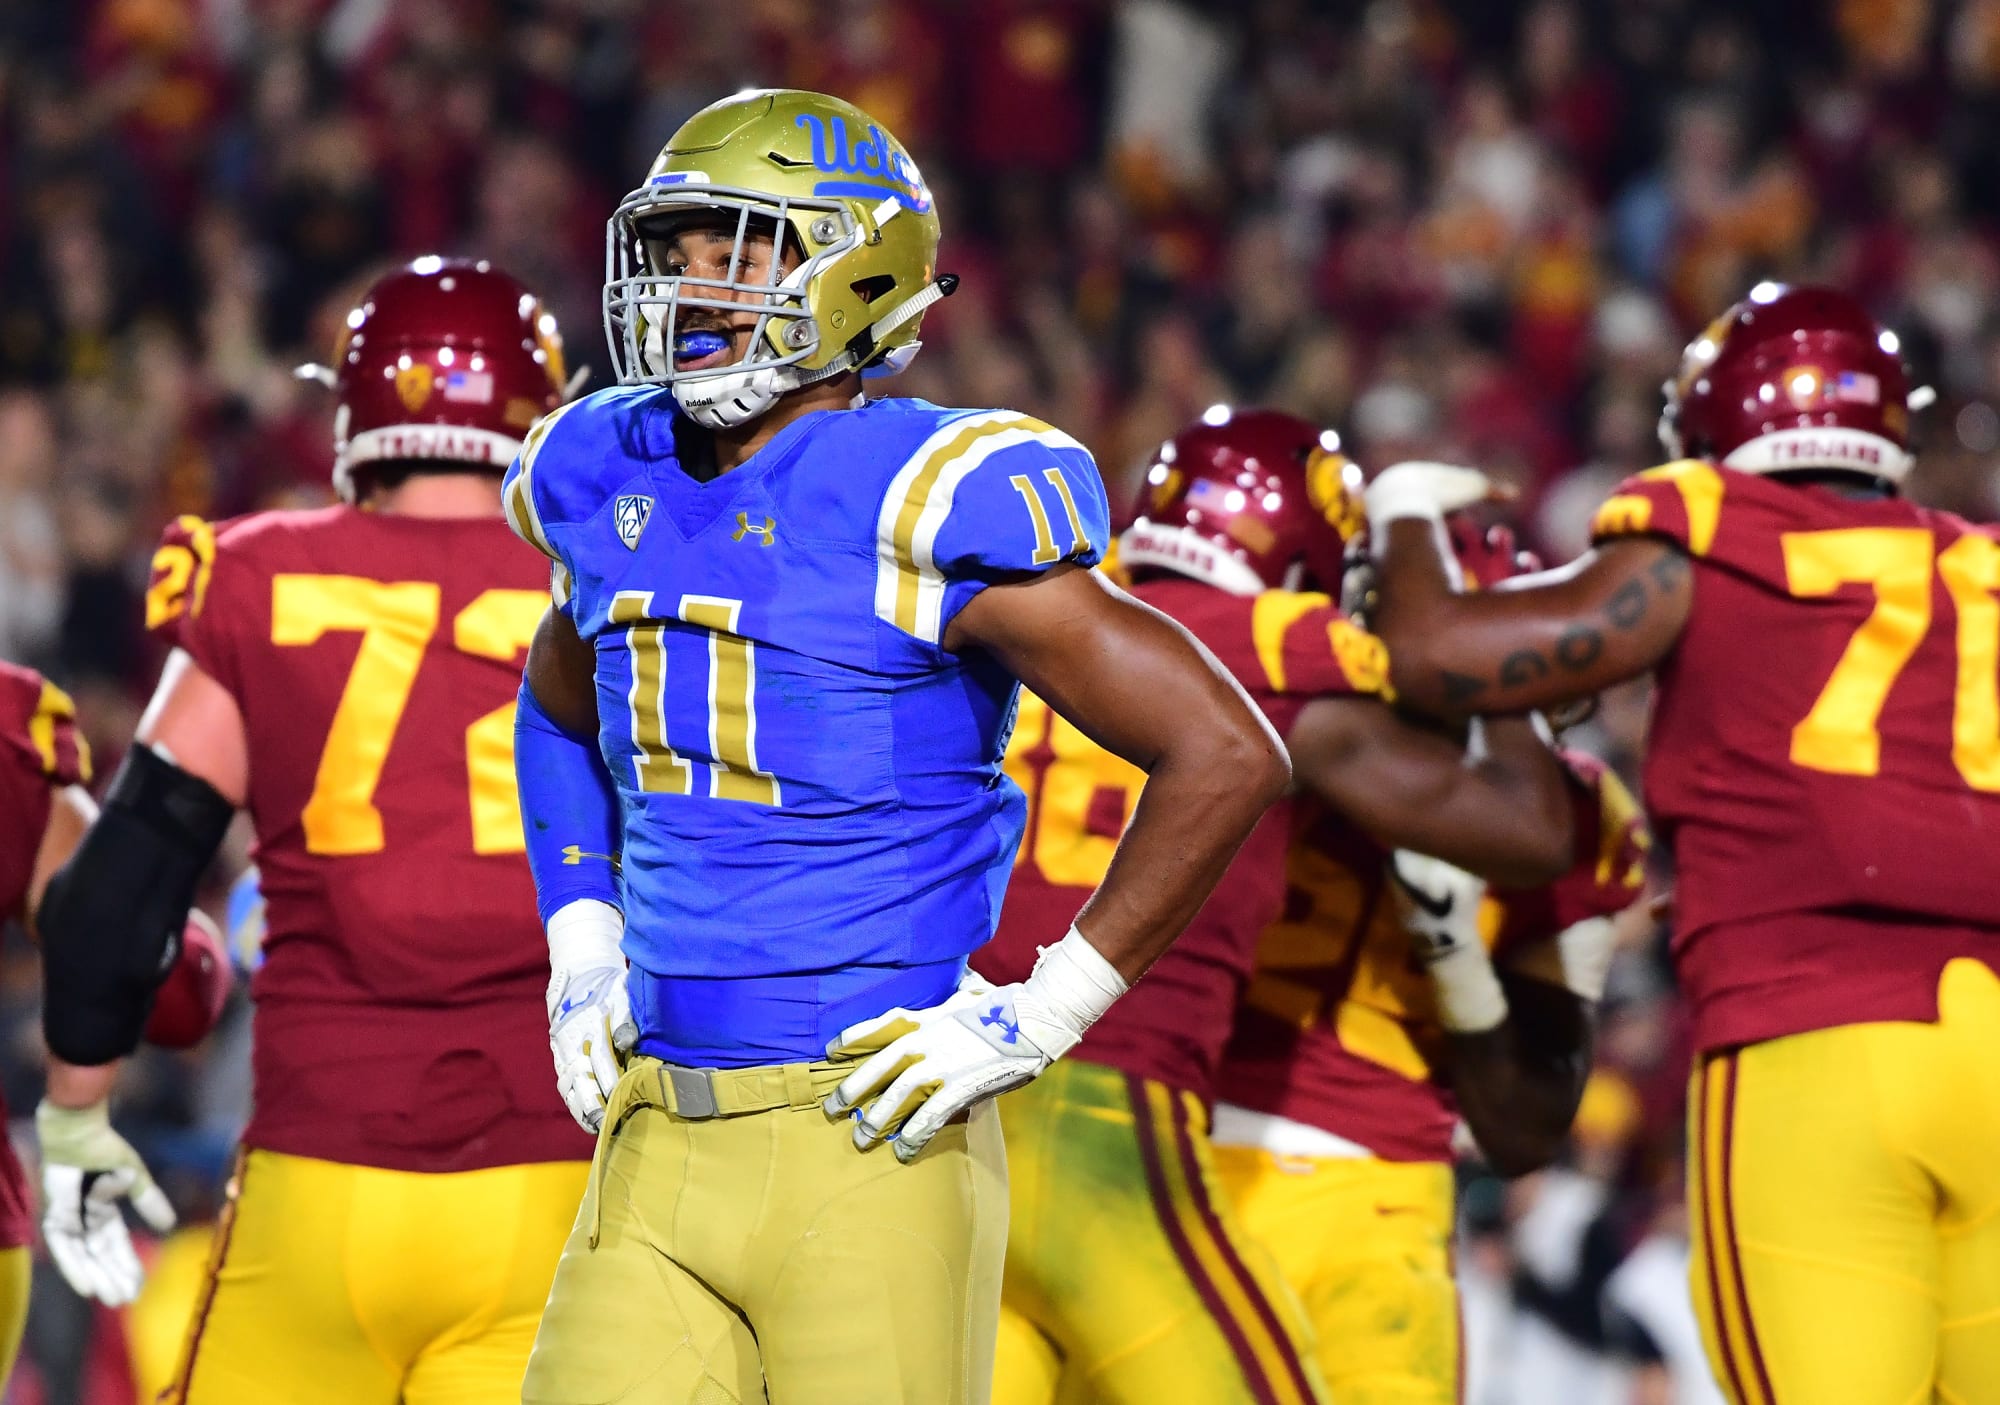 UCLA Football A win over USC would make the pain of going 28 go away